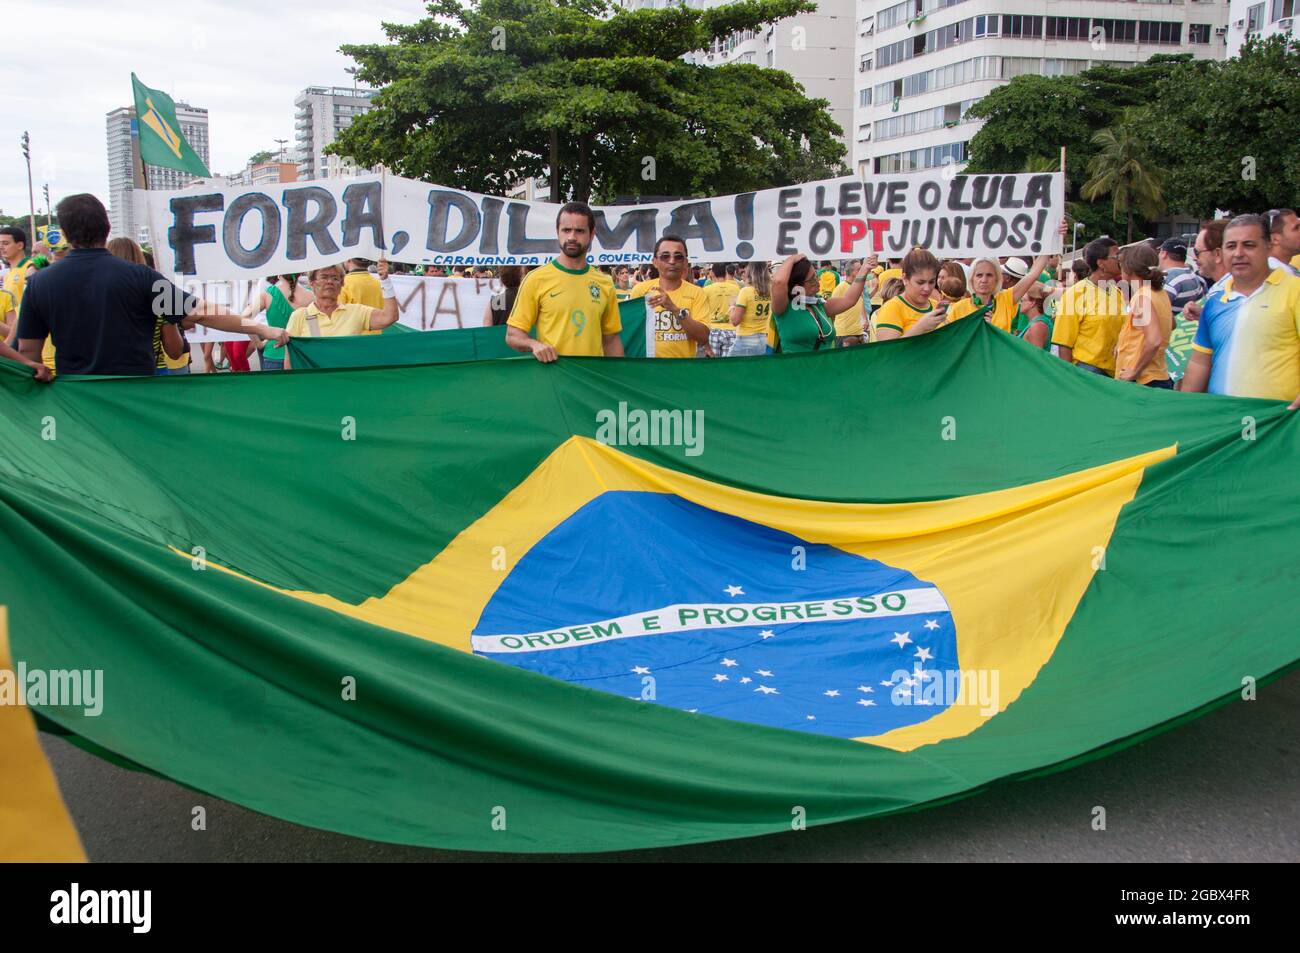 Rio de Janeiro, Brazil - March 13, 2016: Over one million demonstrators in the biggest protest against government, calling for Dilma Rousseff removal. Stock Photo